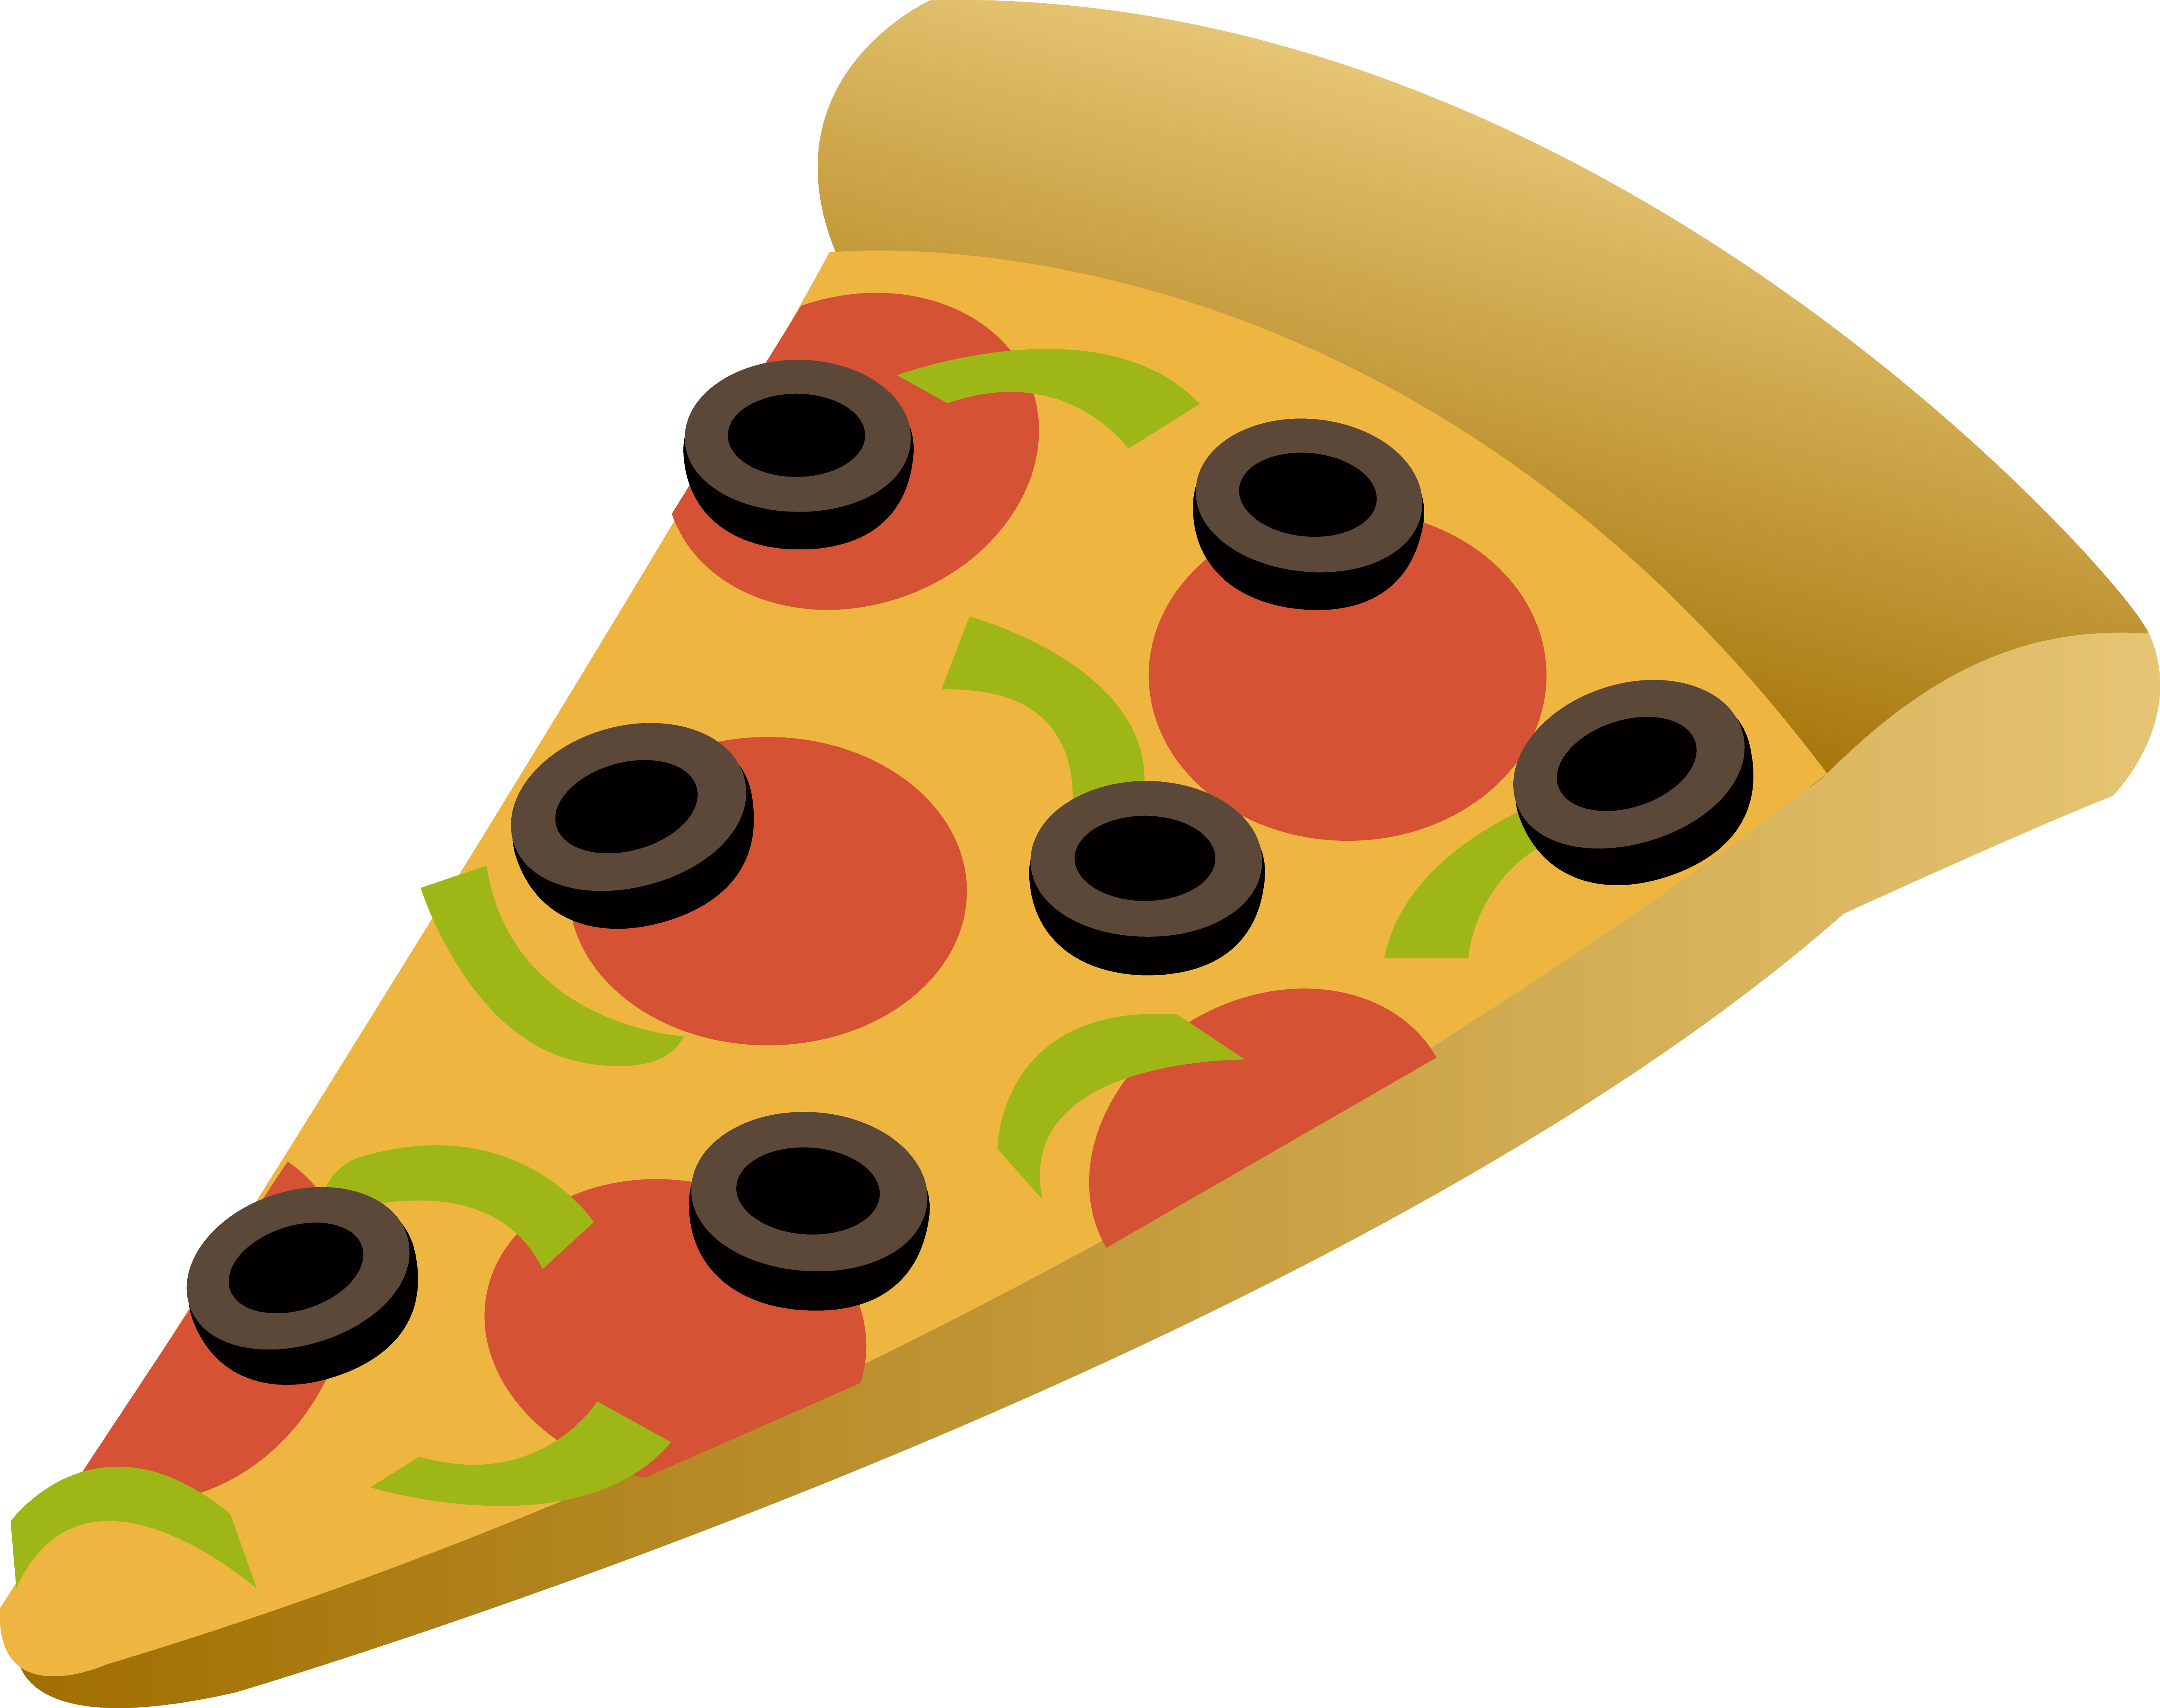 Pizza Slice Graphic | Clipart Panda - Free Clipart Images